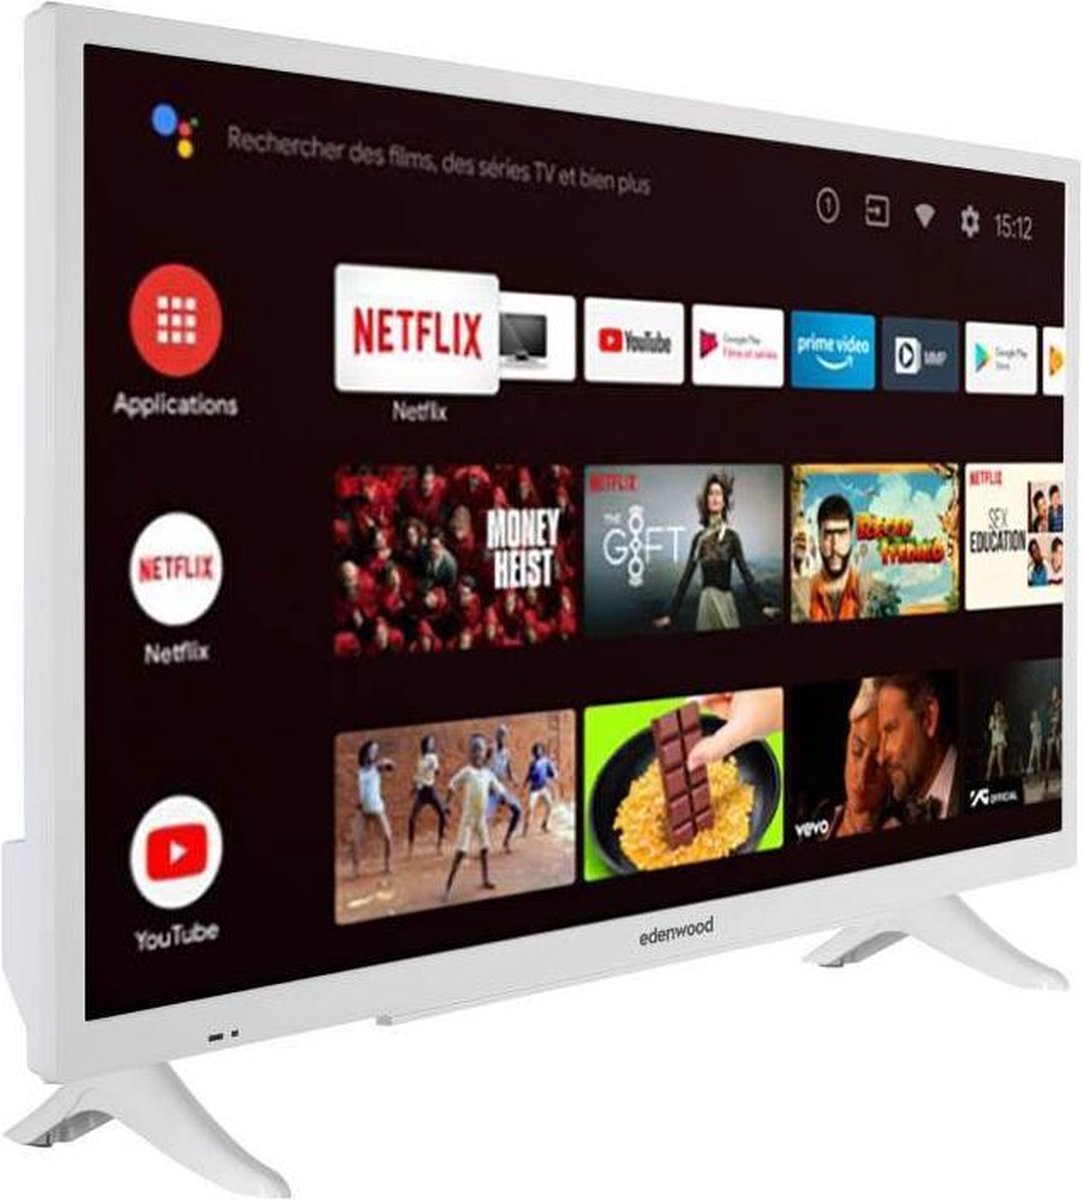 EDENWOOD BY ELECTRO DEPOT - ED32C02HD-VE - TV HD 32" - ANDROID TV - Wit |  bol.com